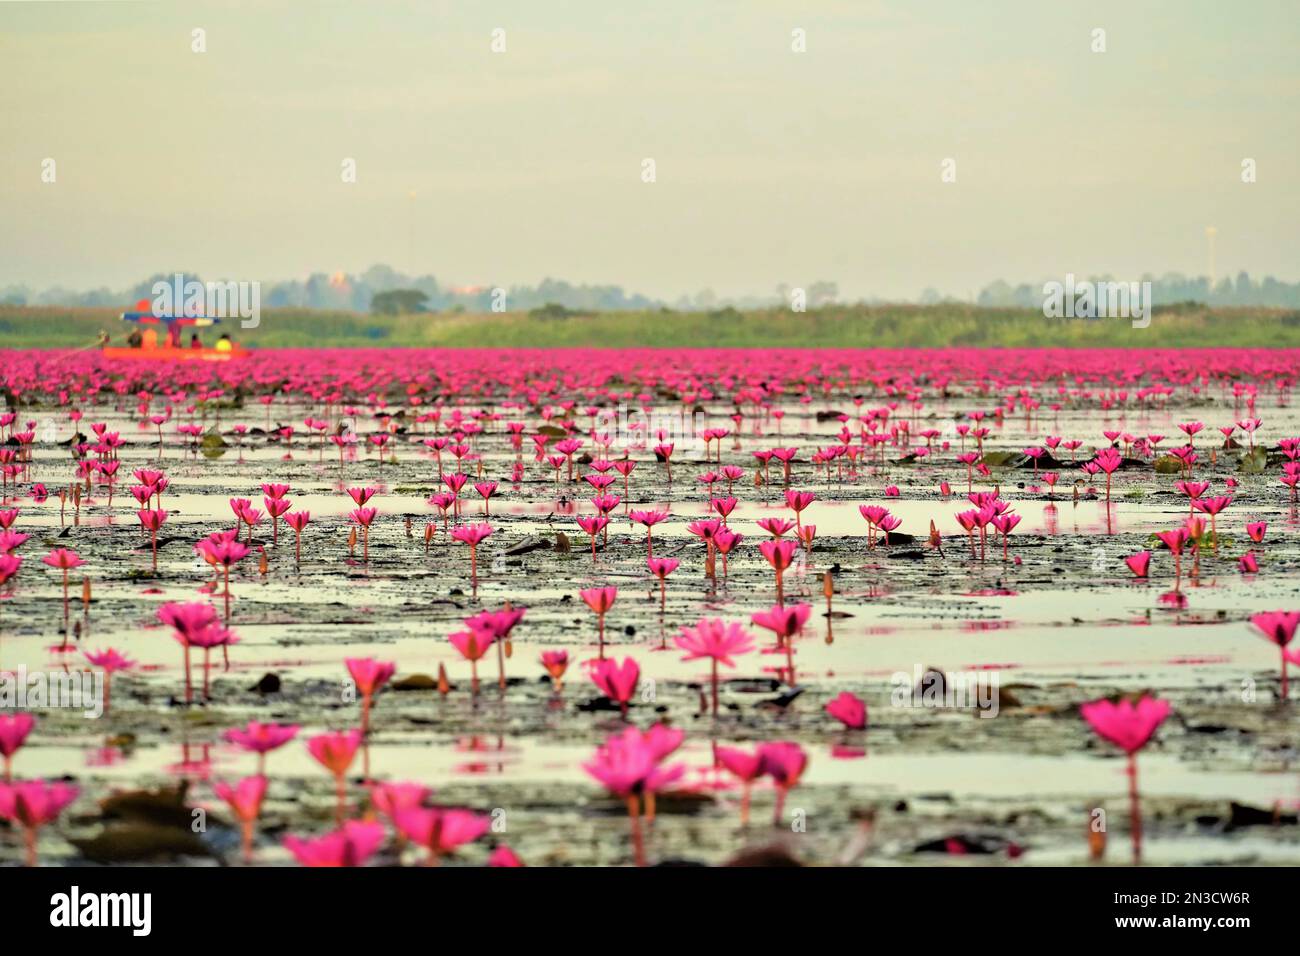 Pink water lilies (Nymphaeaceae) blooming on the lake with travelers on a boat tour enjoying the view in the distance Stock Photo